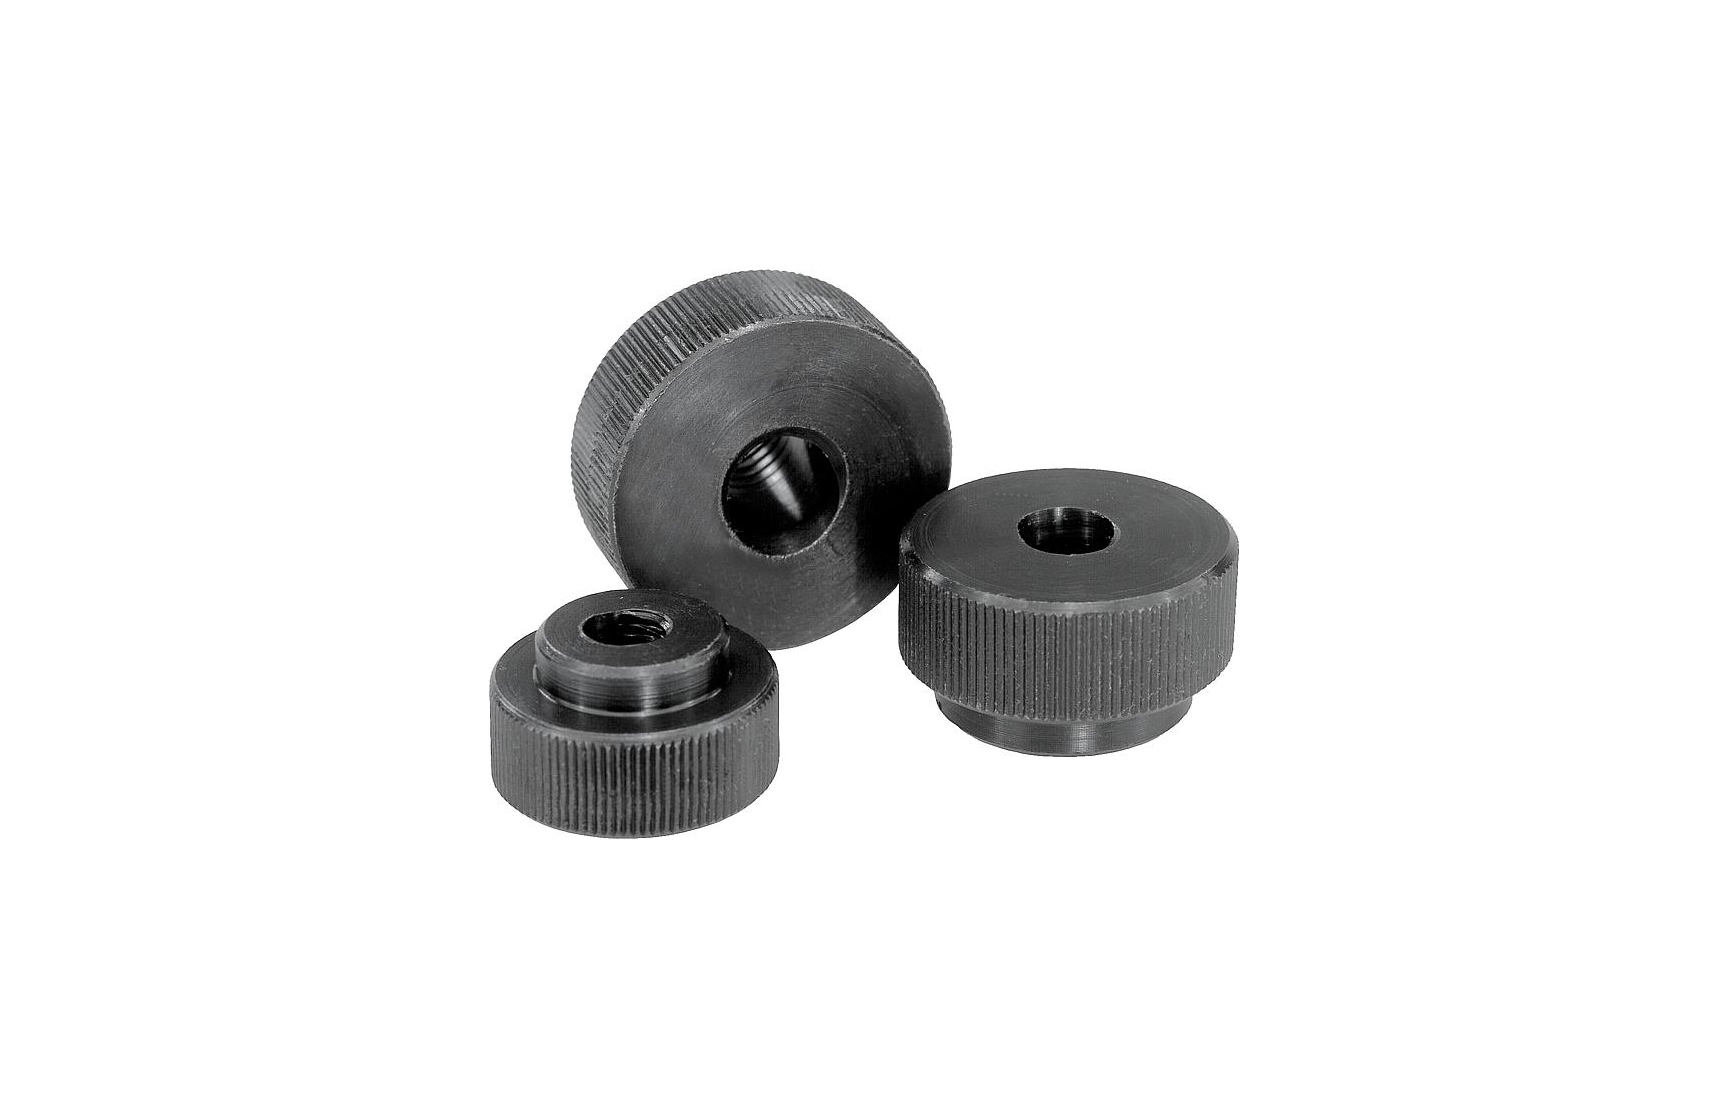 K0139 Knurled nuts quick-acting